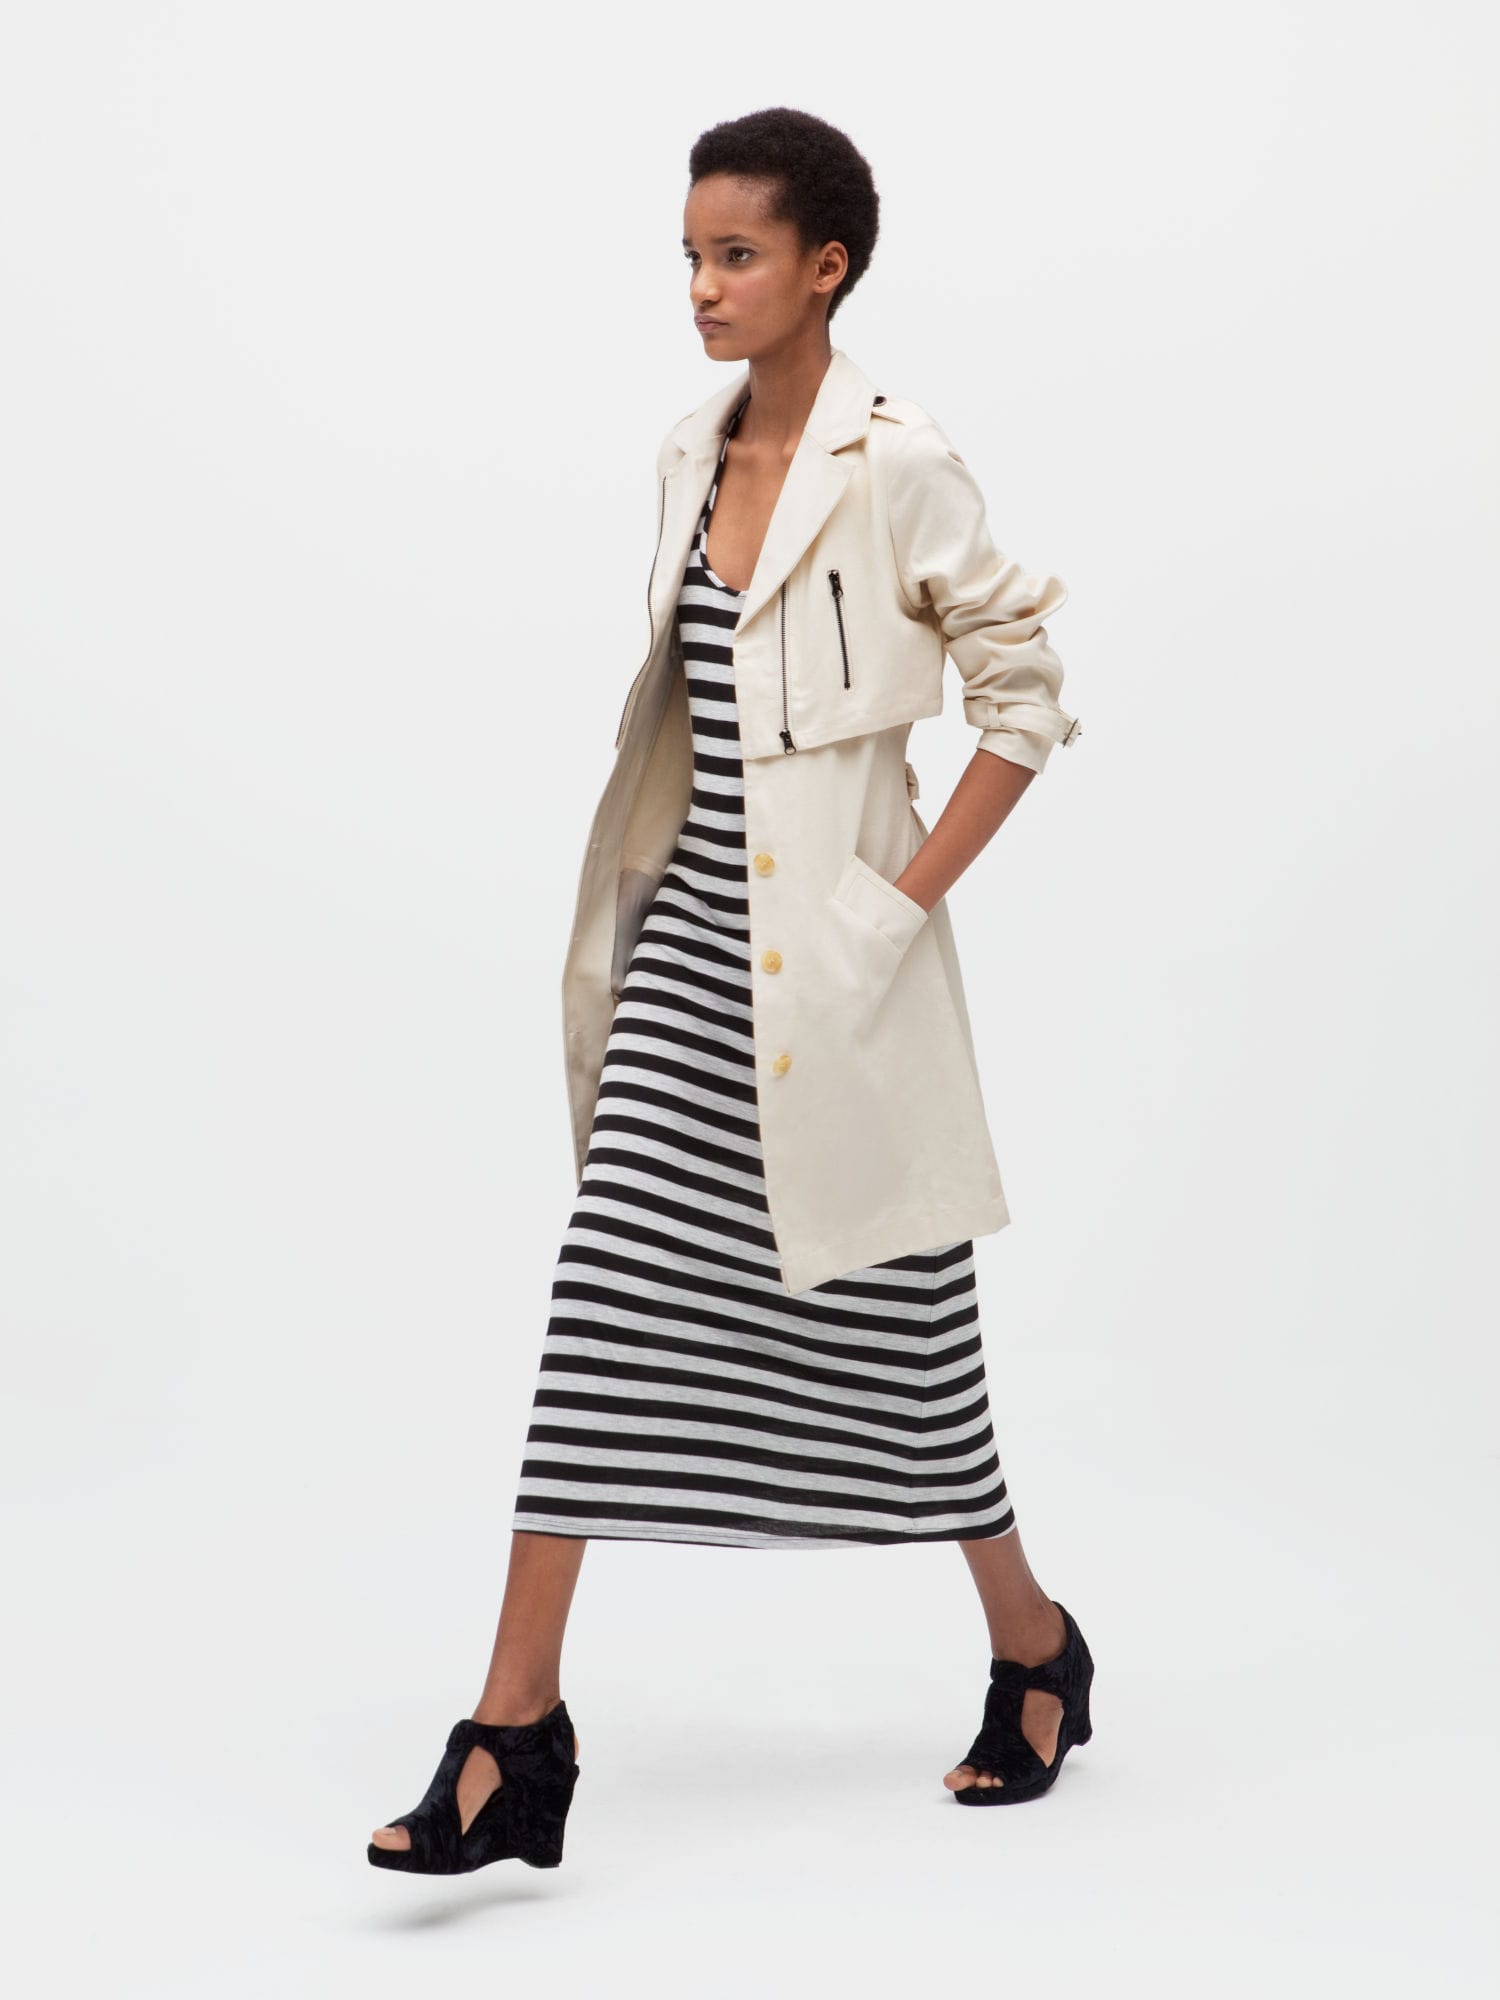 Woman wearing a long striped black-and-white dress with white trench coat rolled up at the sleeves